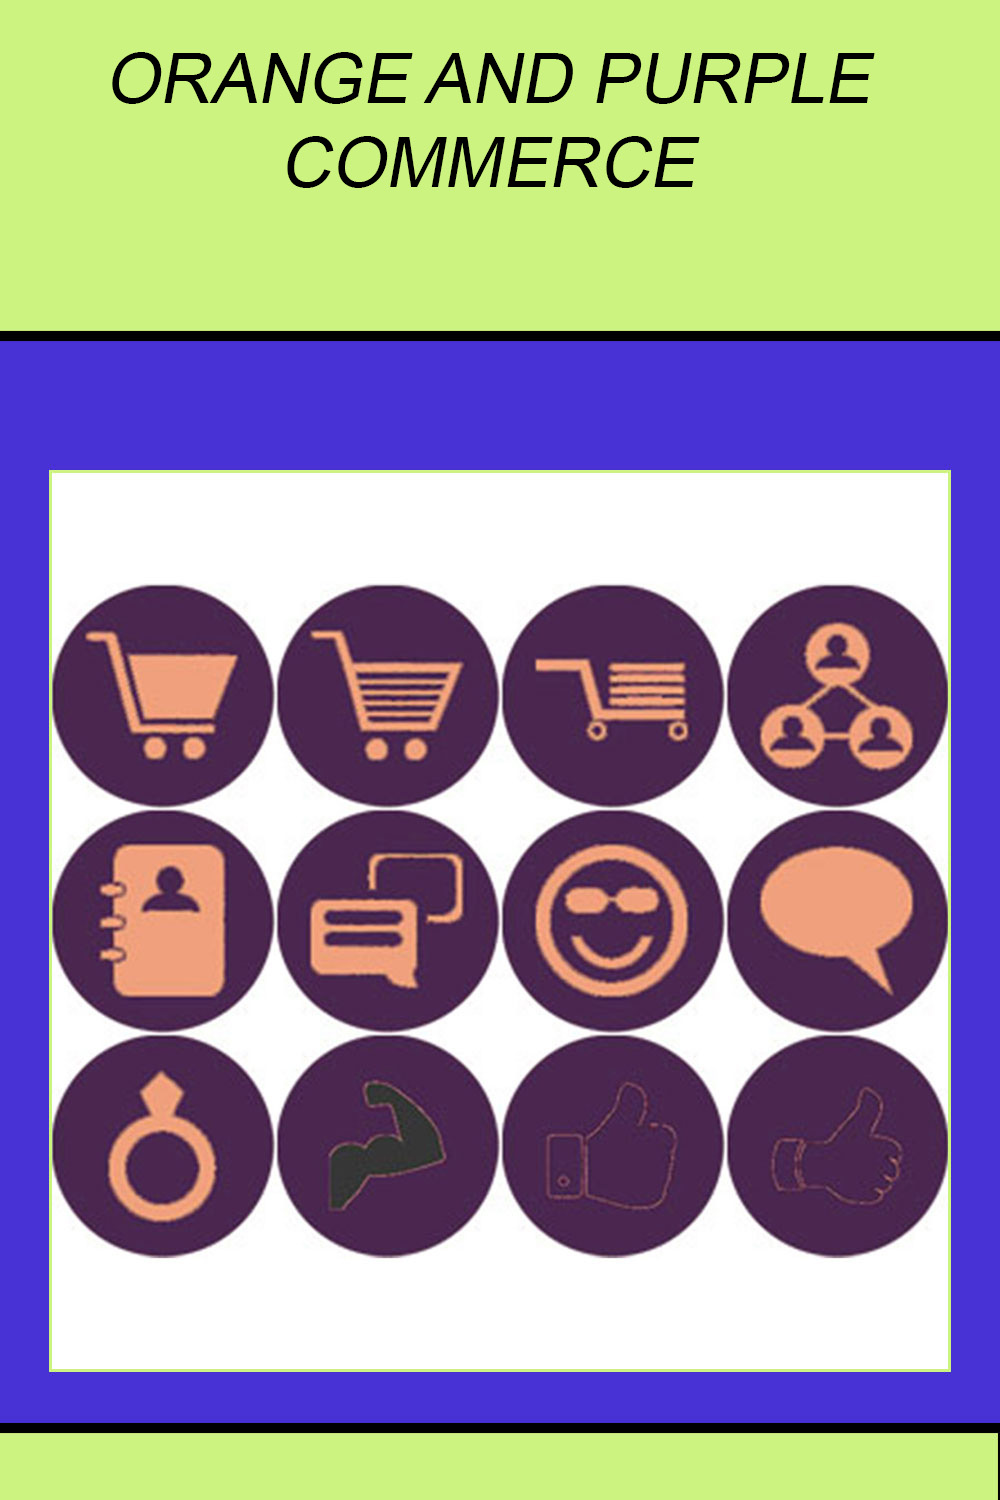 ORANGE AND PURPLE COMMERCE ROUND ICONS pinterest preview image.